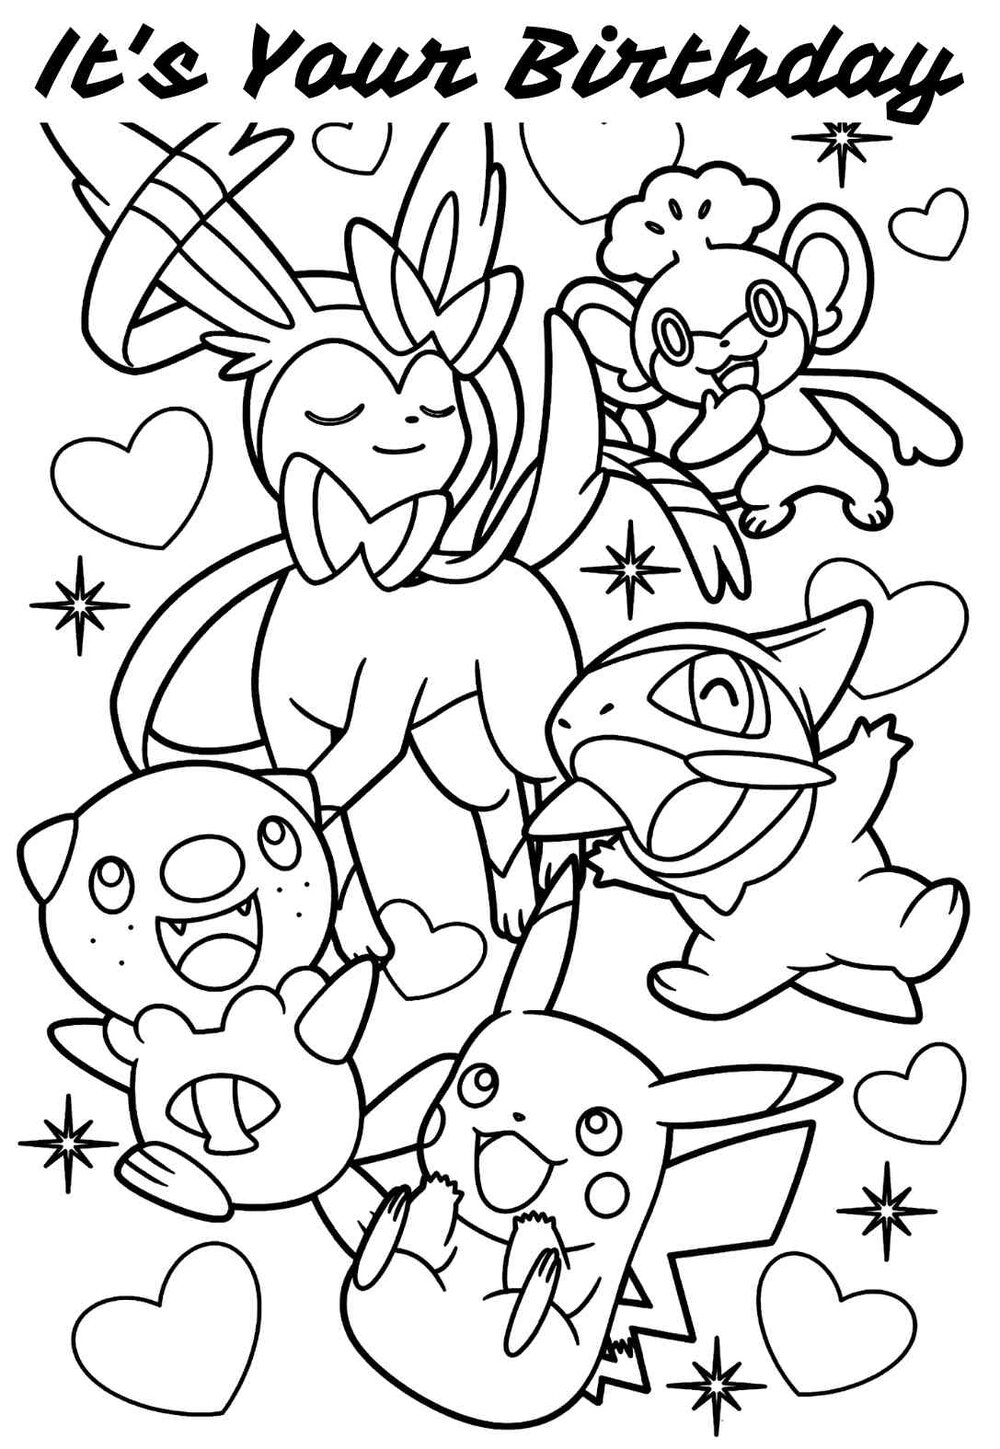 20 Awesome Pokemon Birthday Coloring Pages & Cards free ...